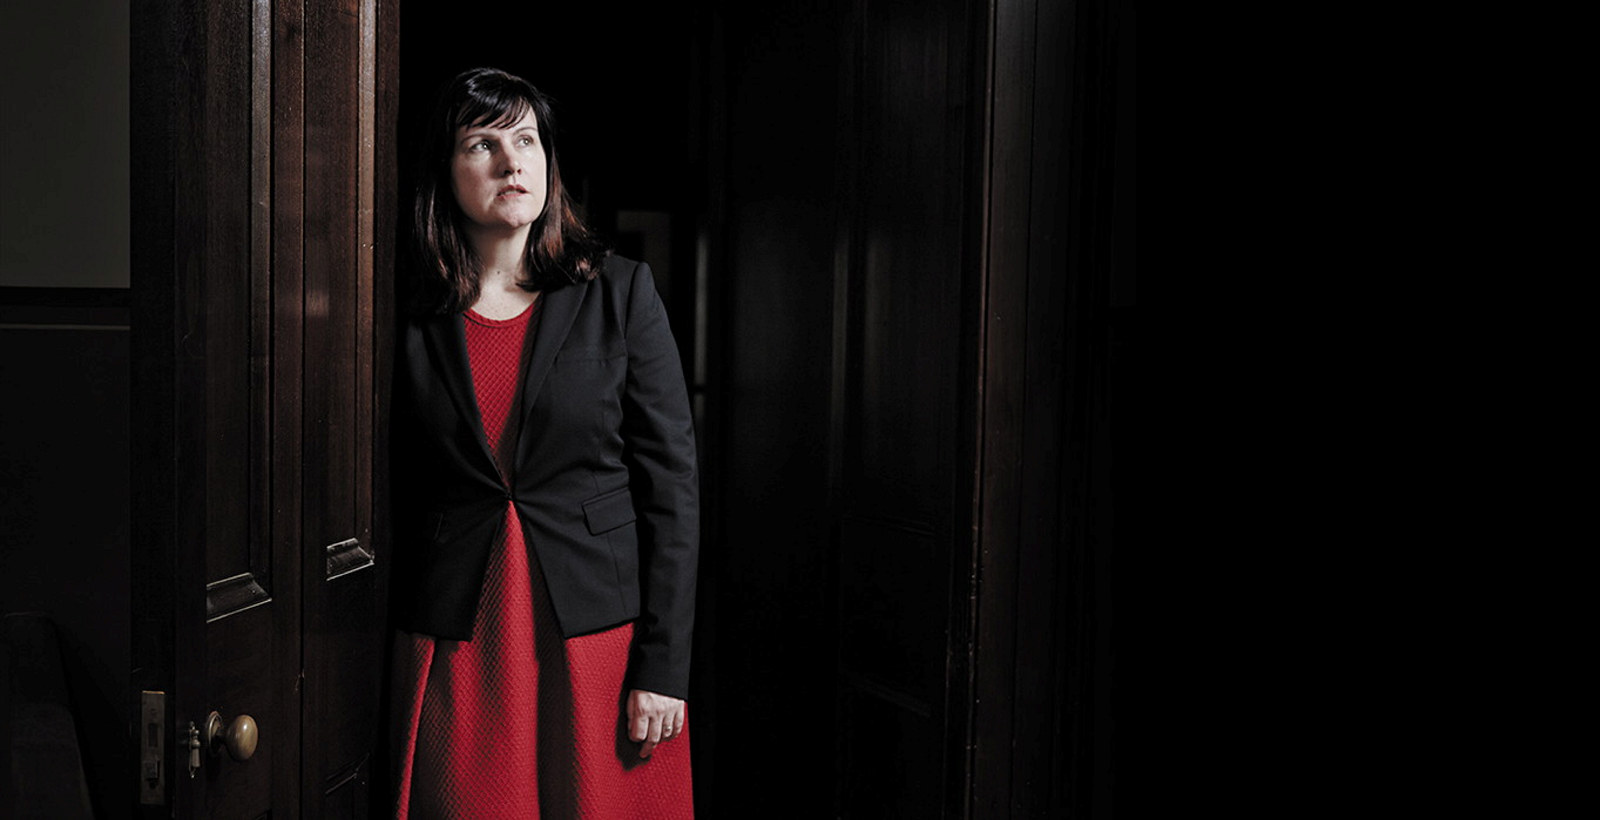 Dark haired woman wearing a red dress and black blazer leaning on a wooden door frame